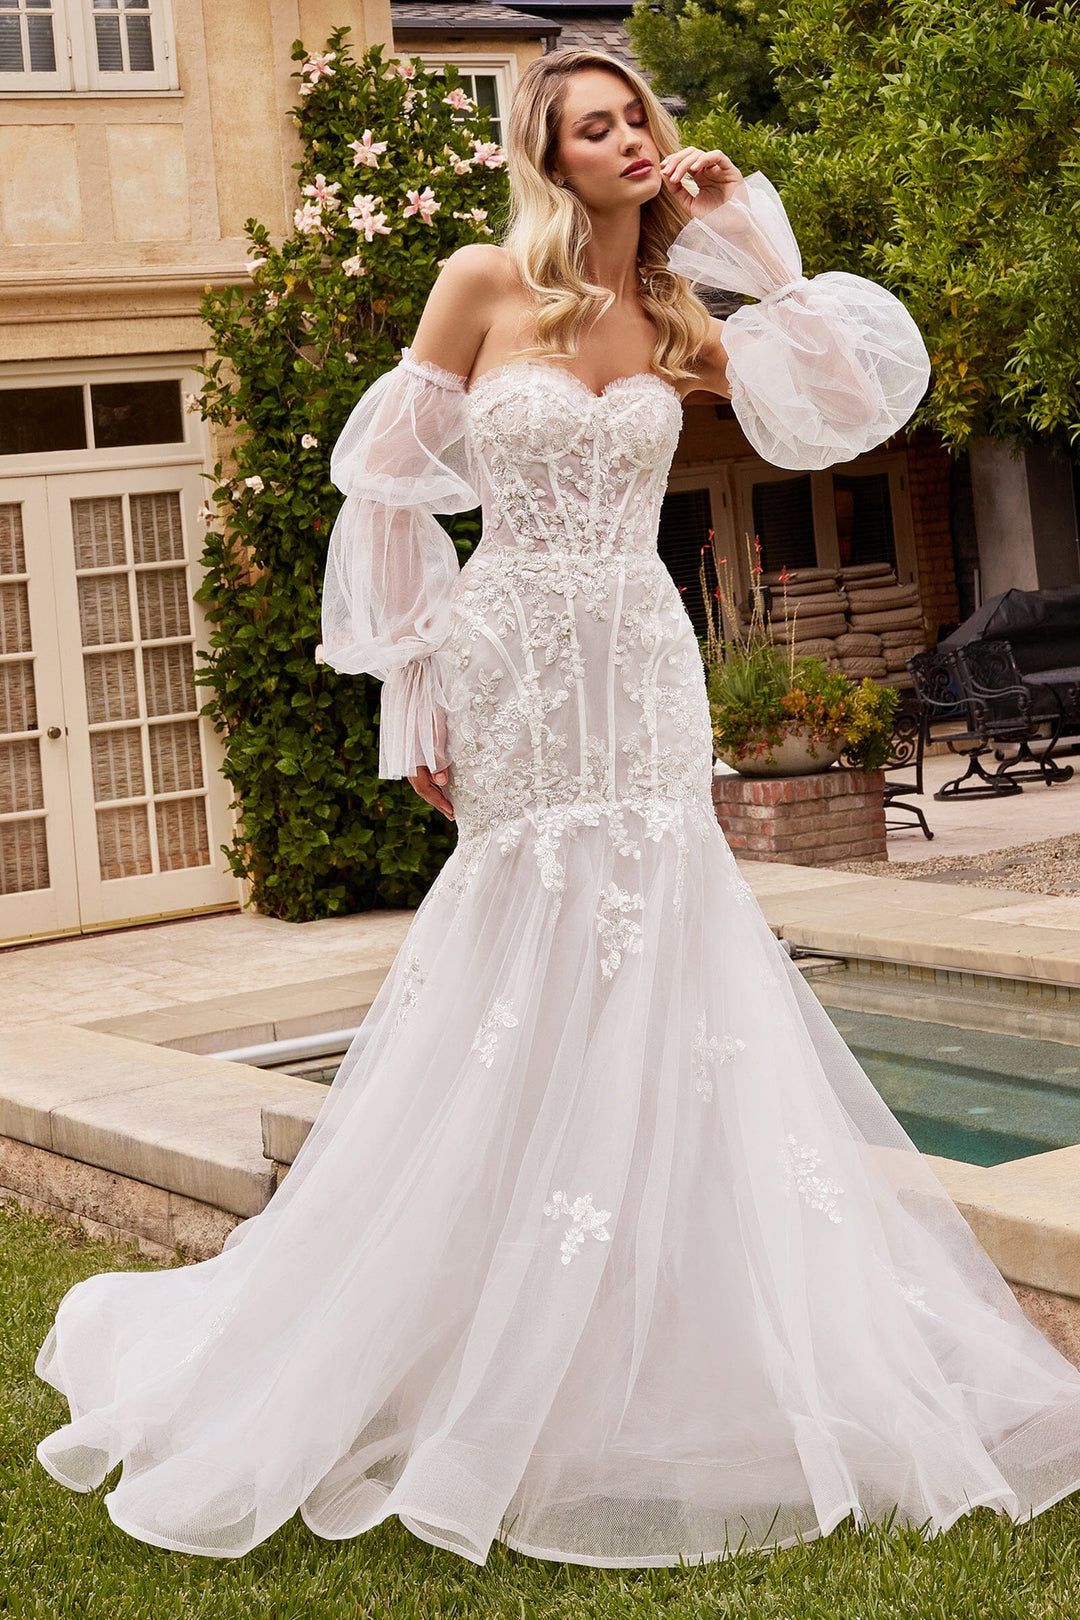 Strapless Puff Sleeve Wedding Gown by Ladivine CD858W